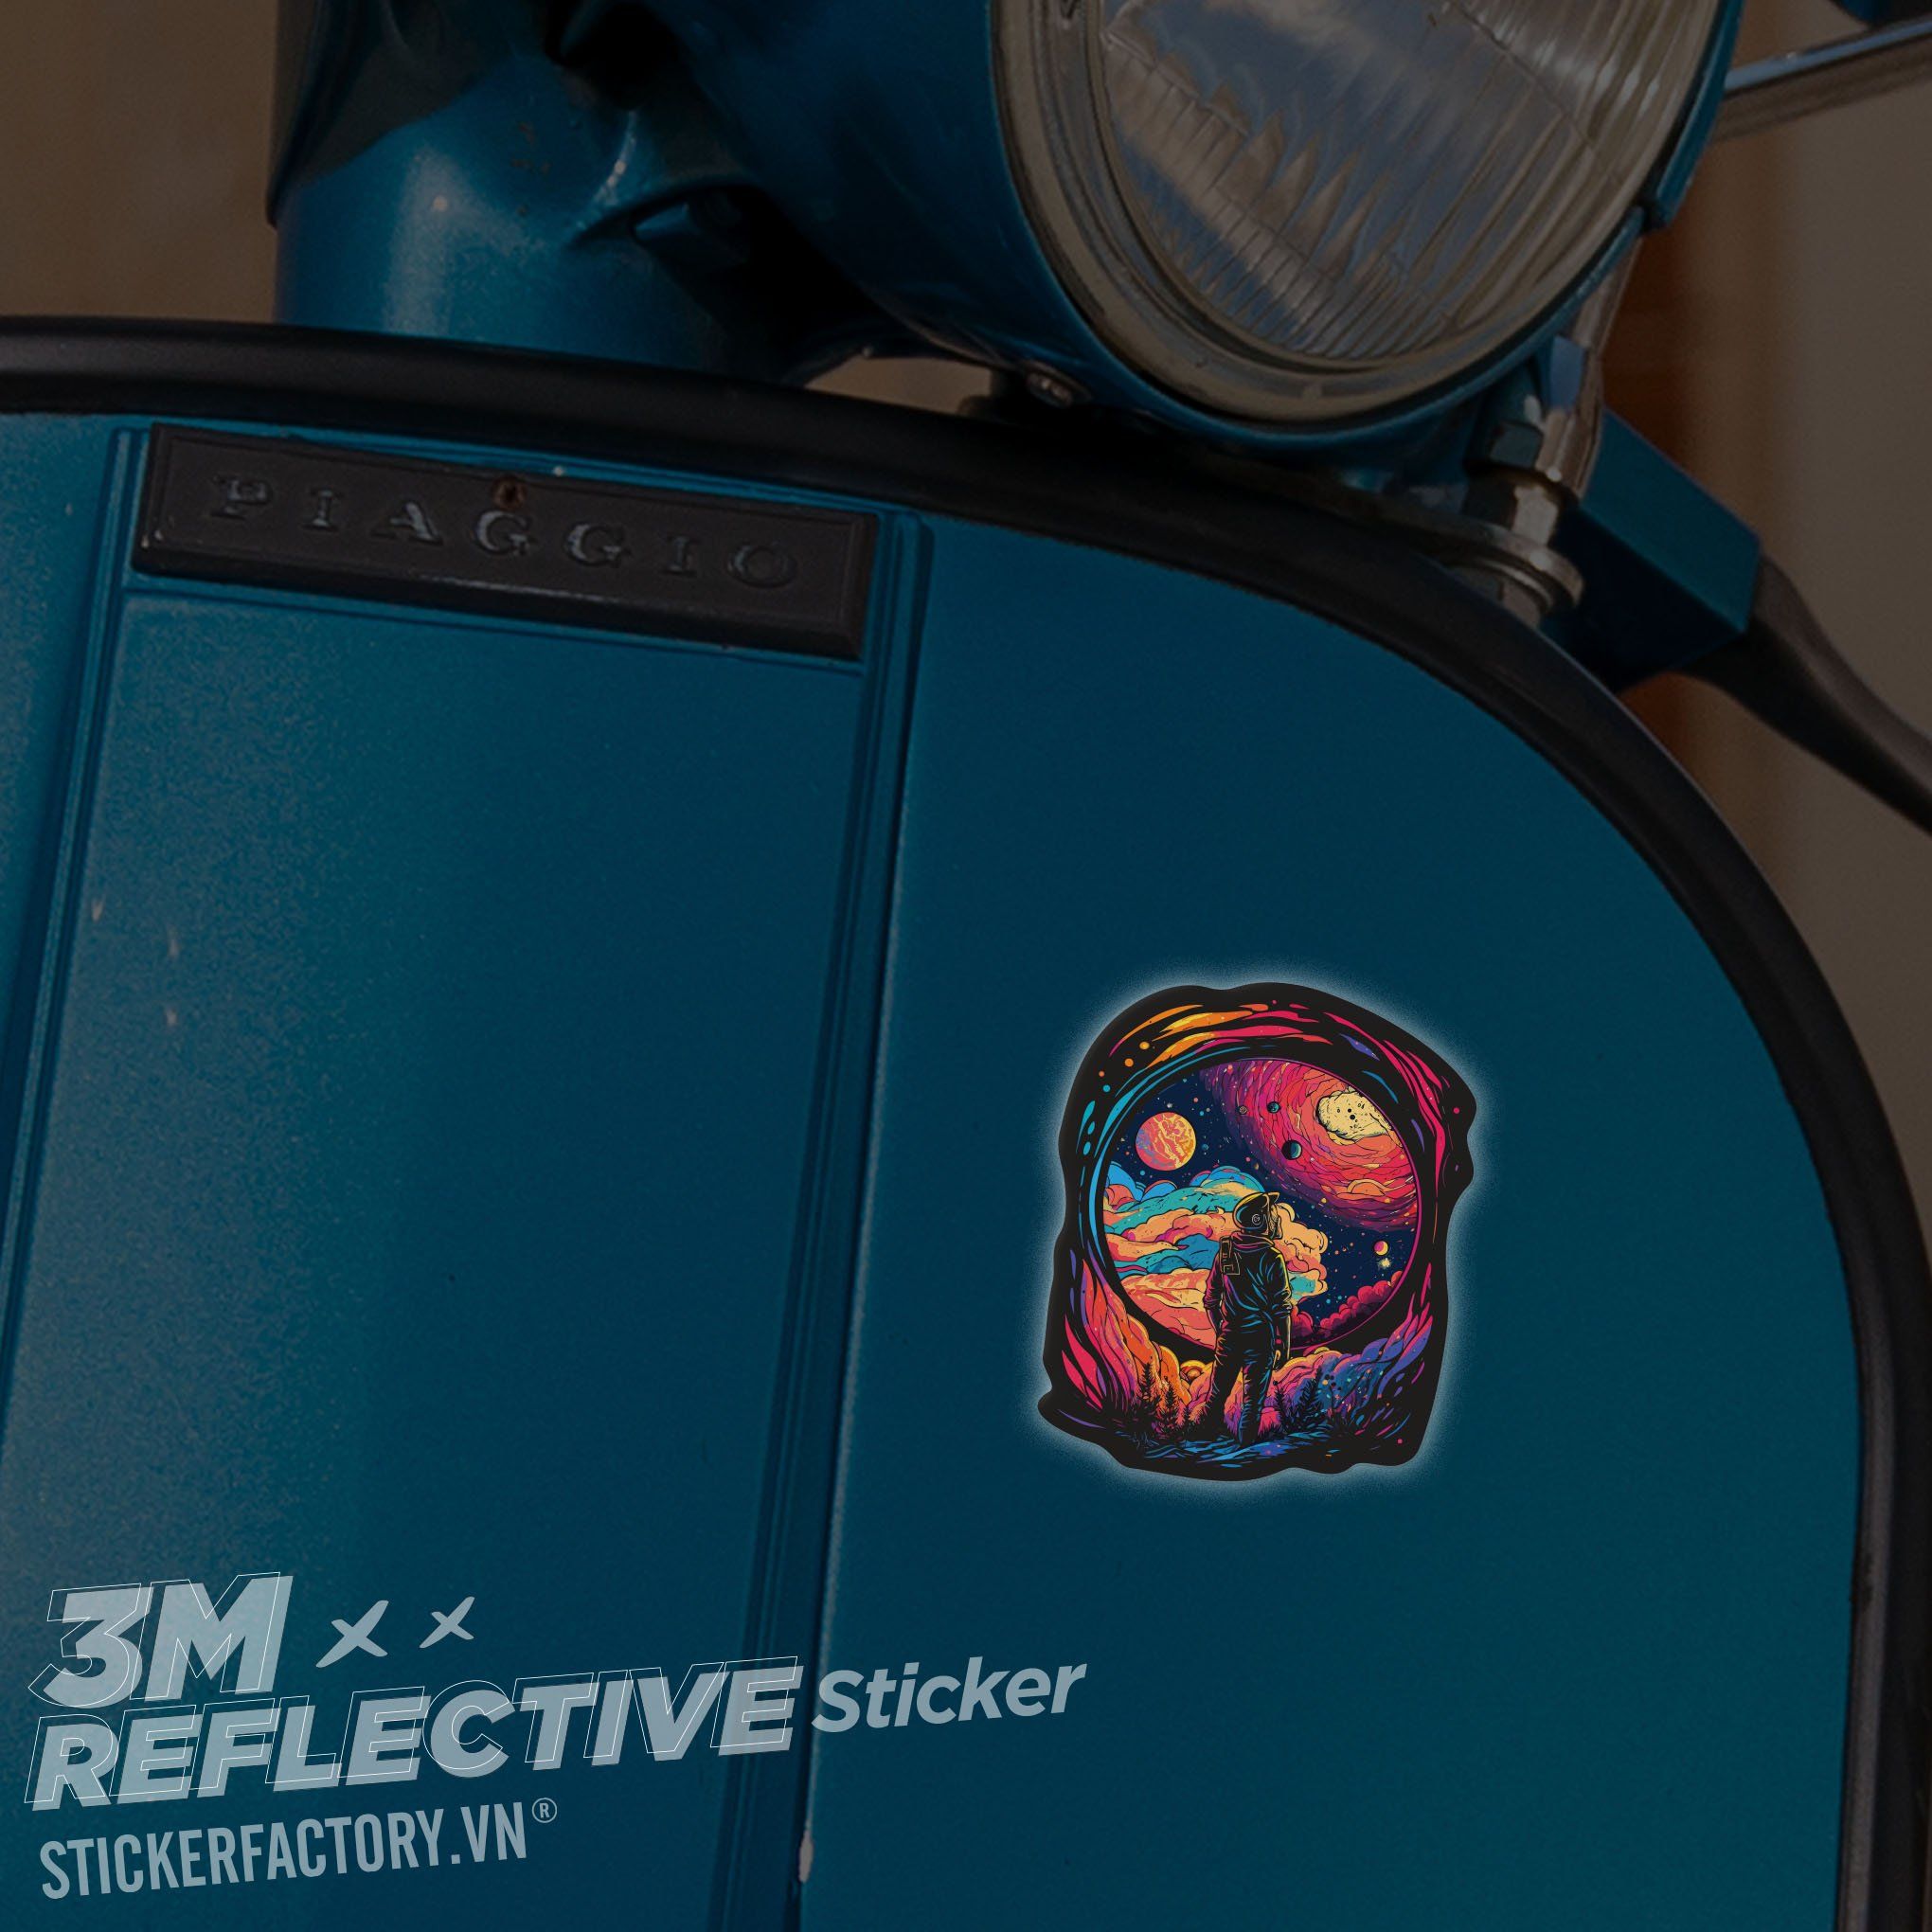 A MAN LOOKING AT THE UNIVERSE 3M - Reflective Sticker Die-cut